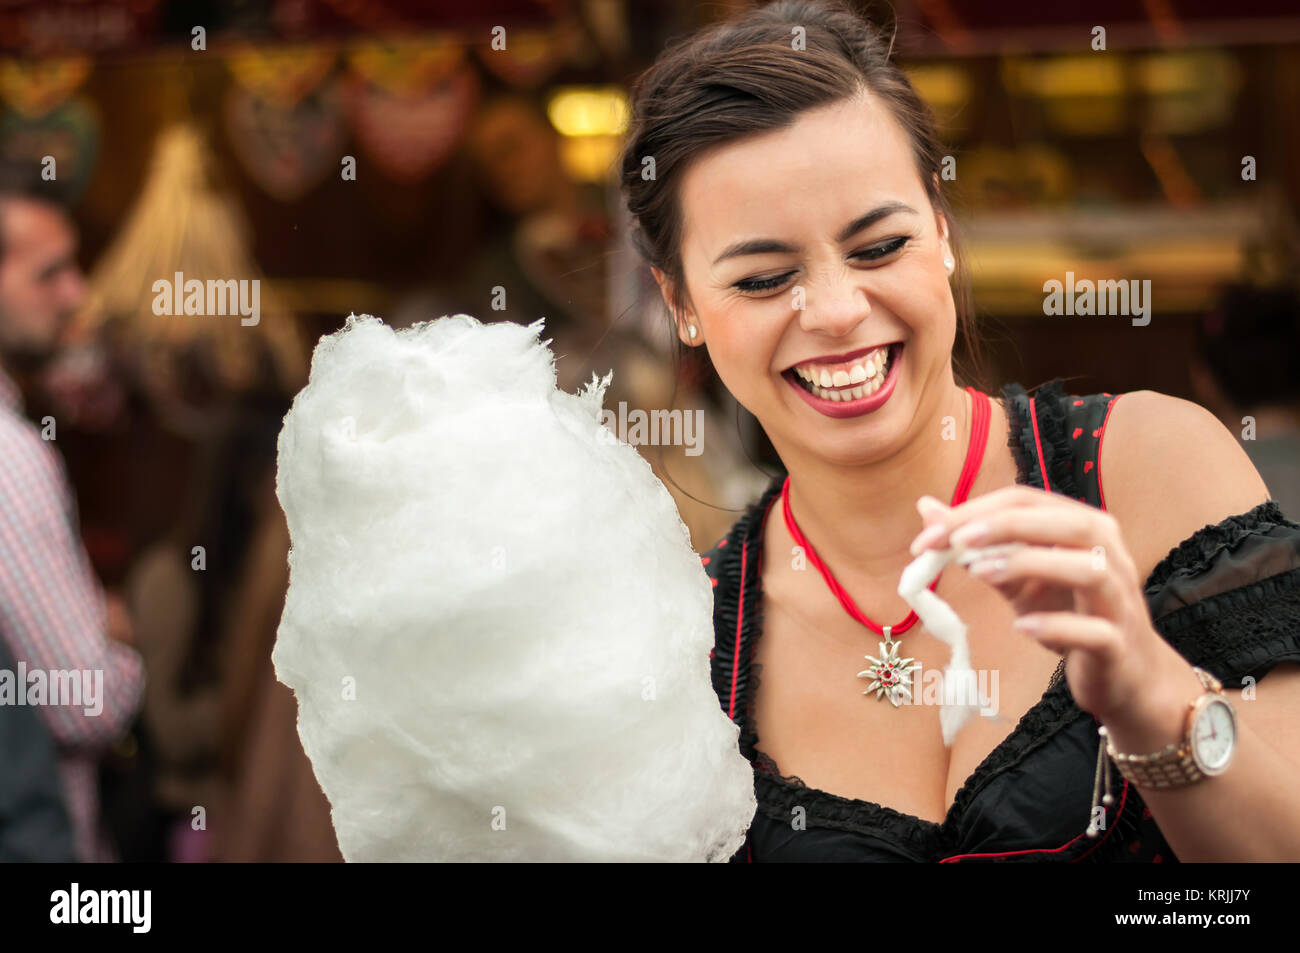 Attractive young woman wearing a traditional Dirndl dress with cotton candy floss at the Oktoberfest. Stock Photo